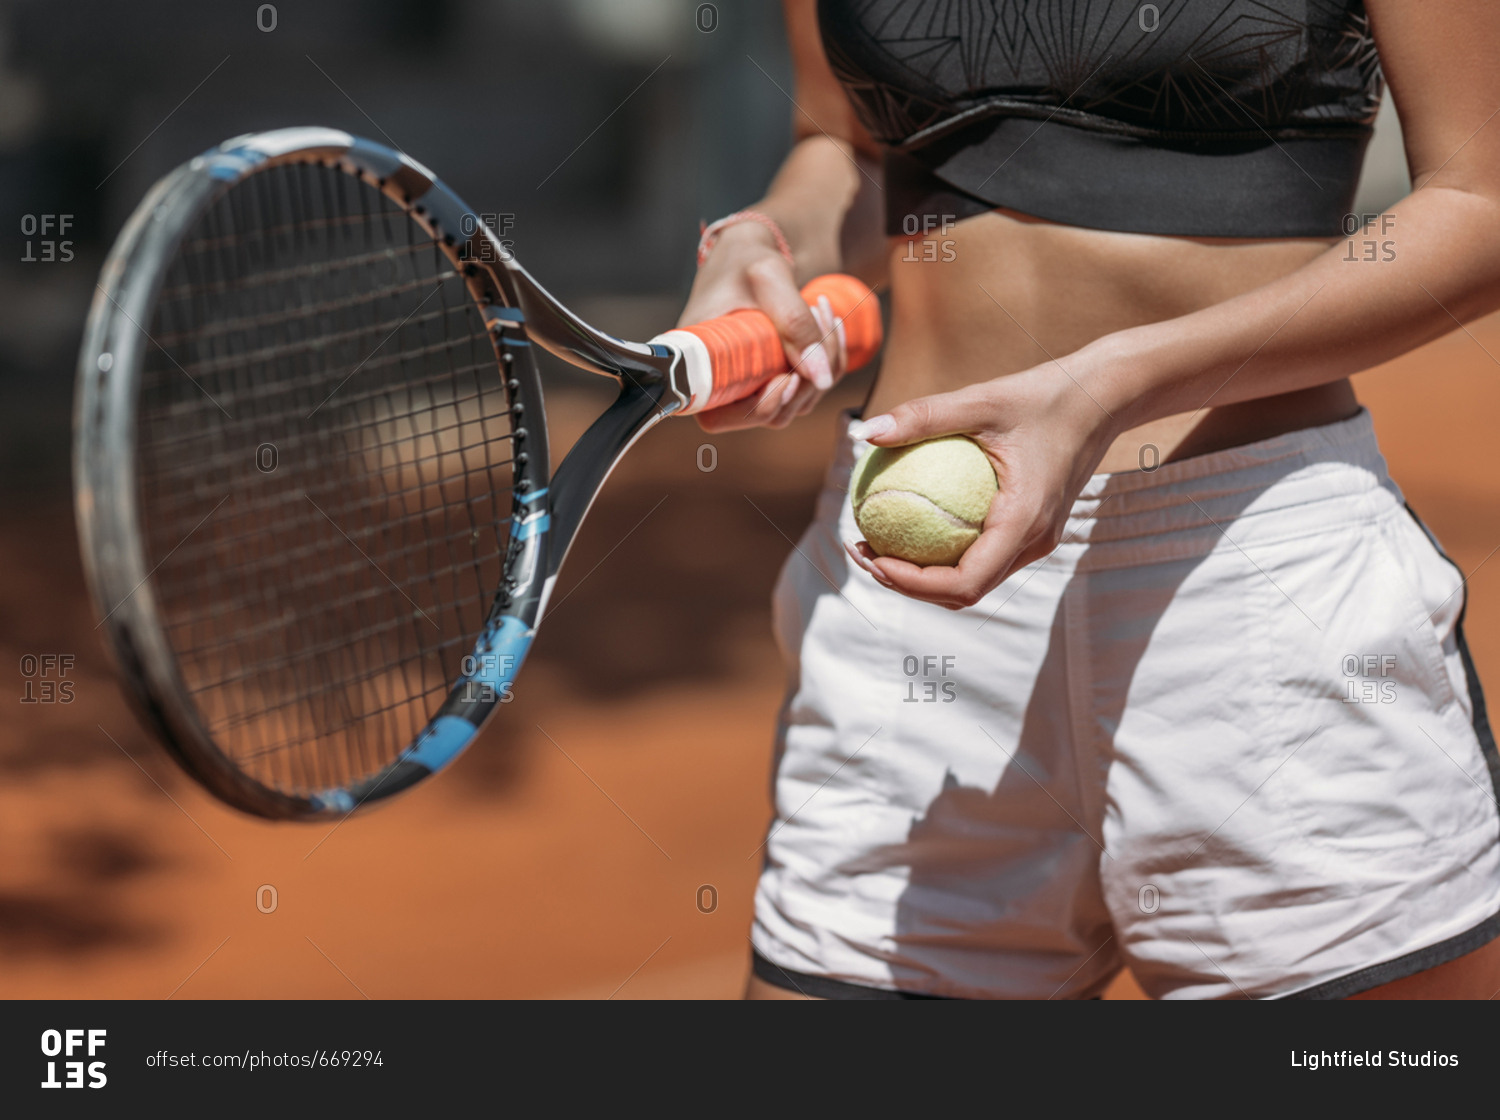 Cropped shot of athletic young woman with tennis racket and ball